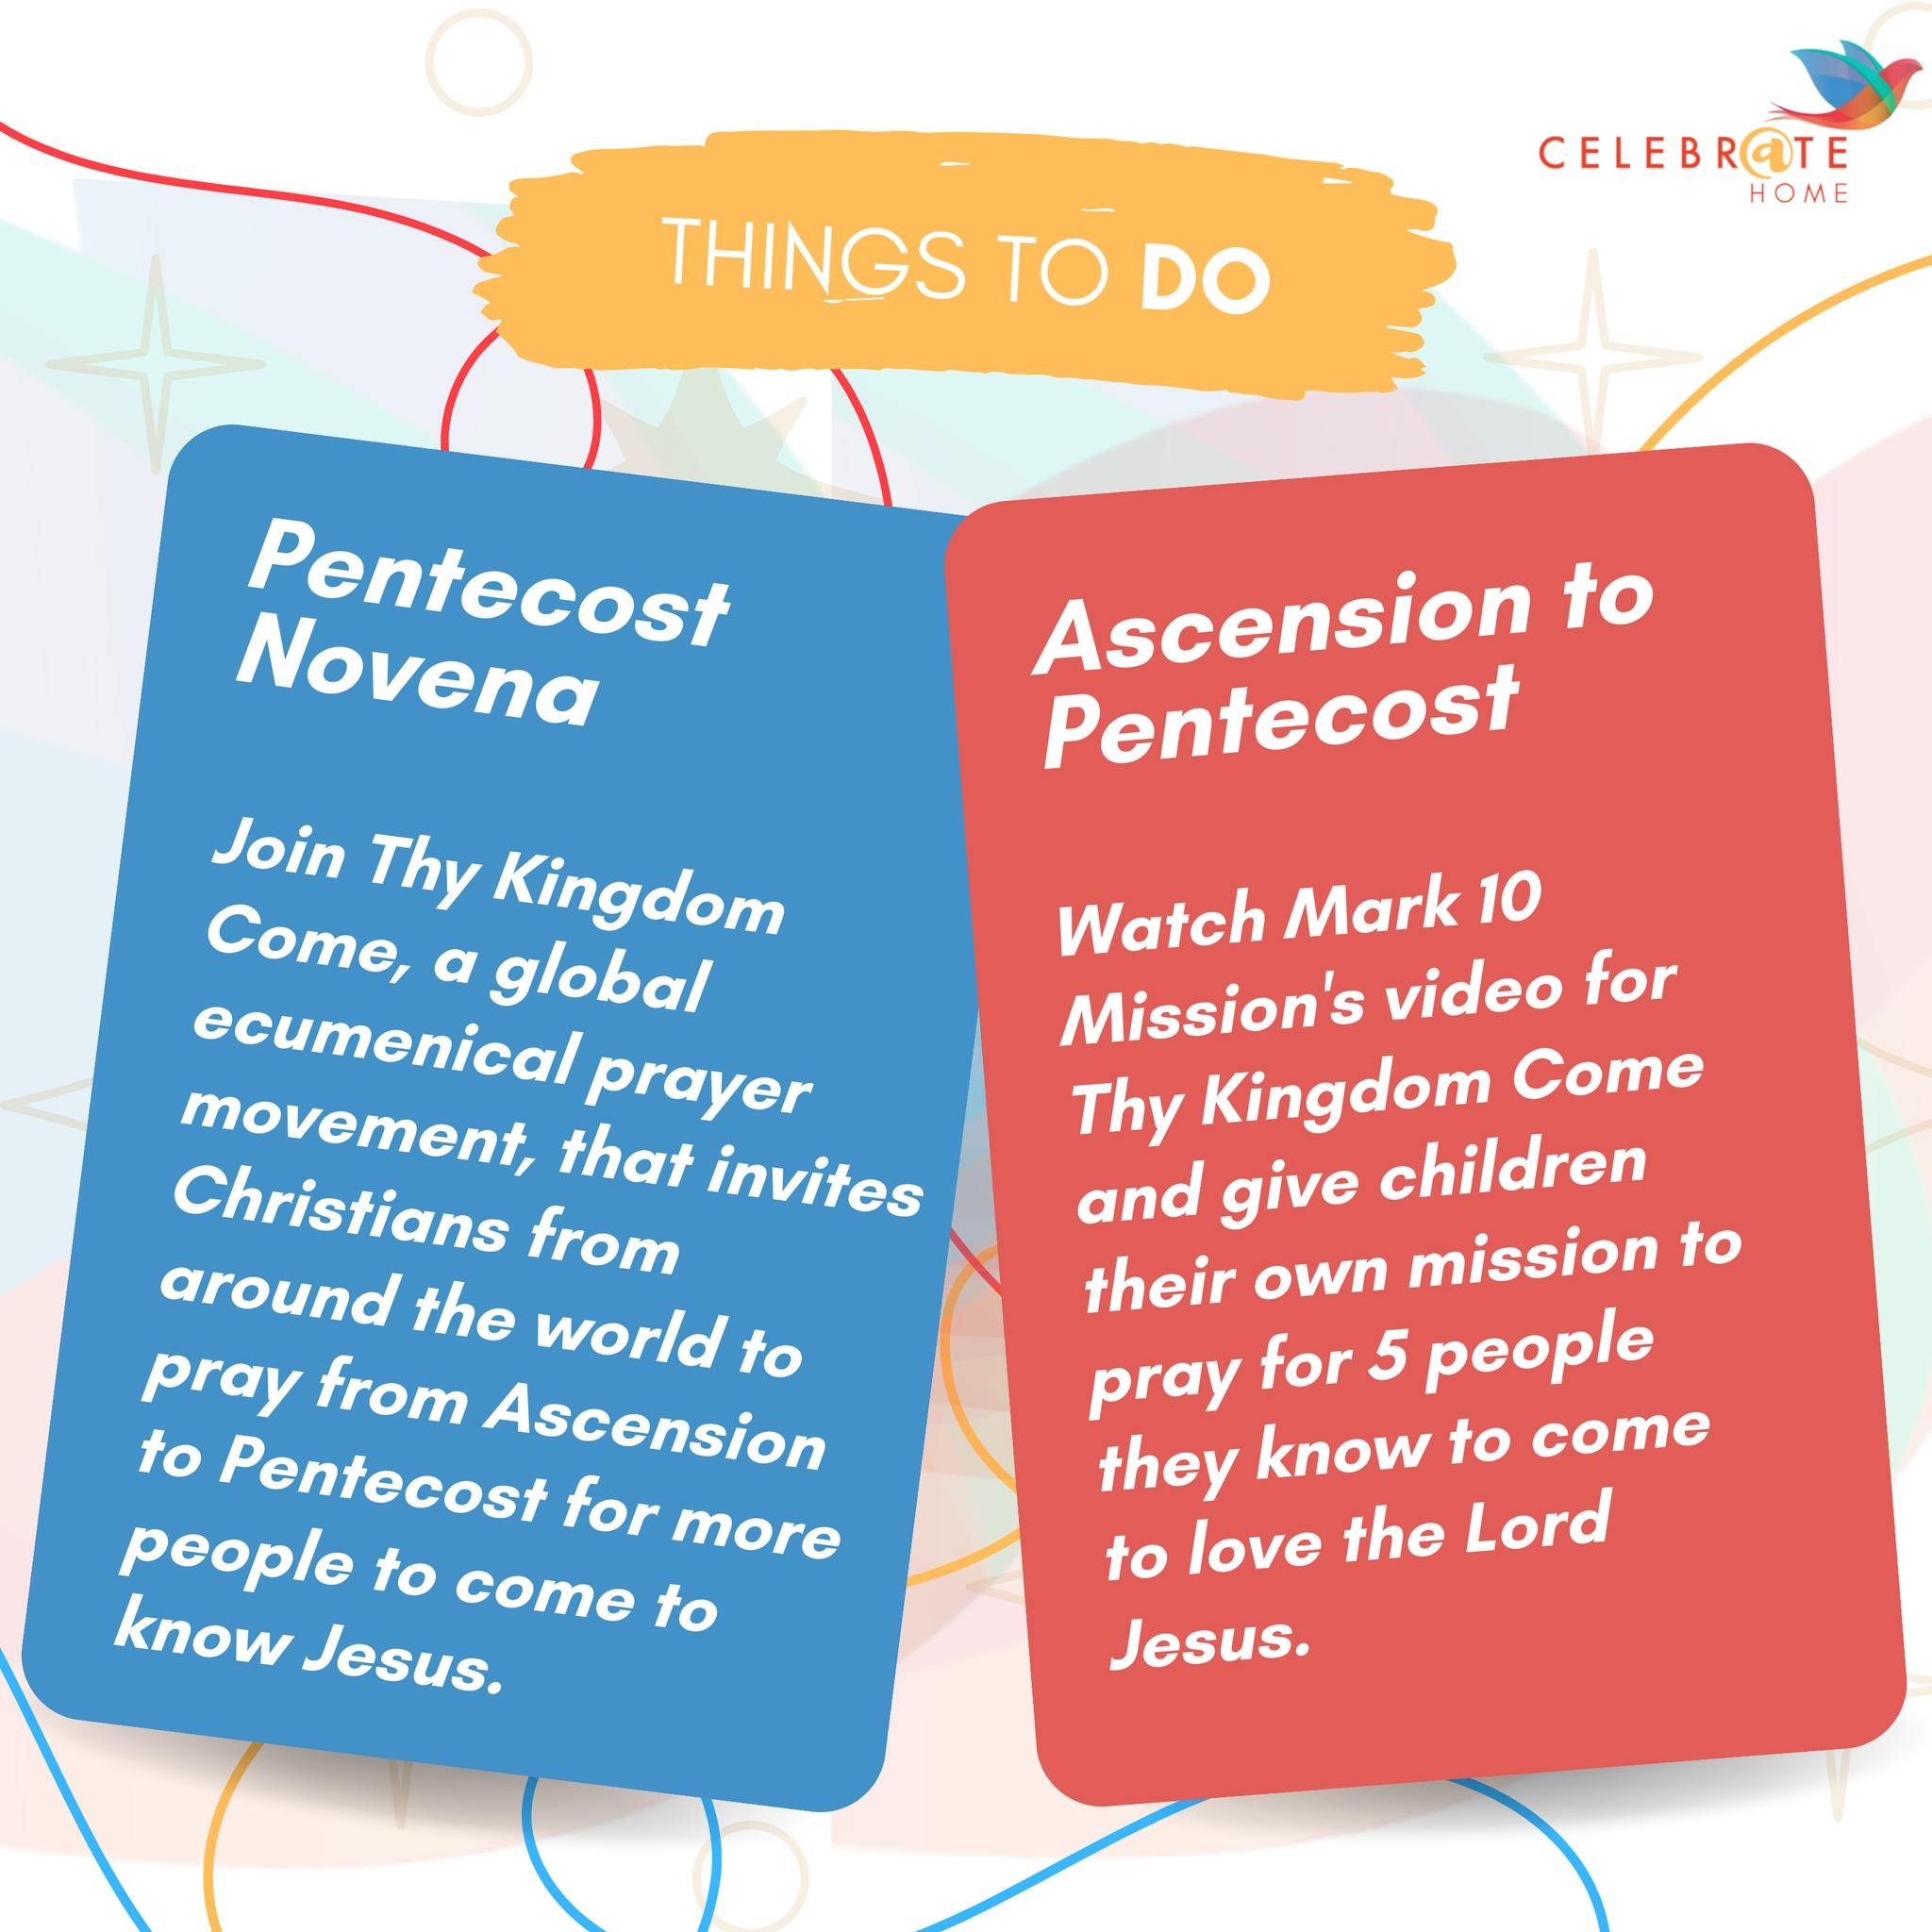 Join us as we pray a Novena from Ascension to Pentecost from 10-18 May for more people to come to know Jesus.

Pentecost Novena: www.thykingdomcome.global/resources/resources-catholic-church

Thy Kingdom Come: www.themark10mission.co.uk/thy-kingdom-c